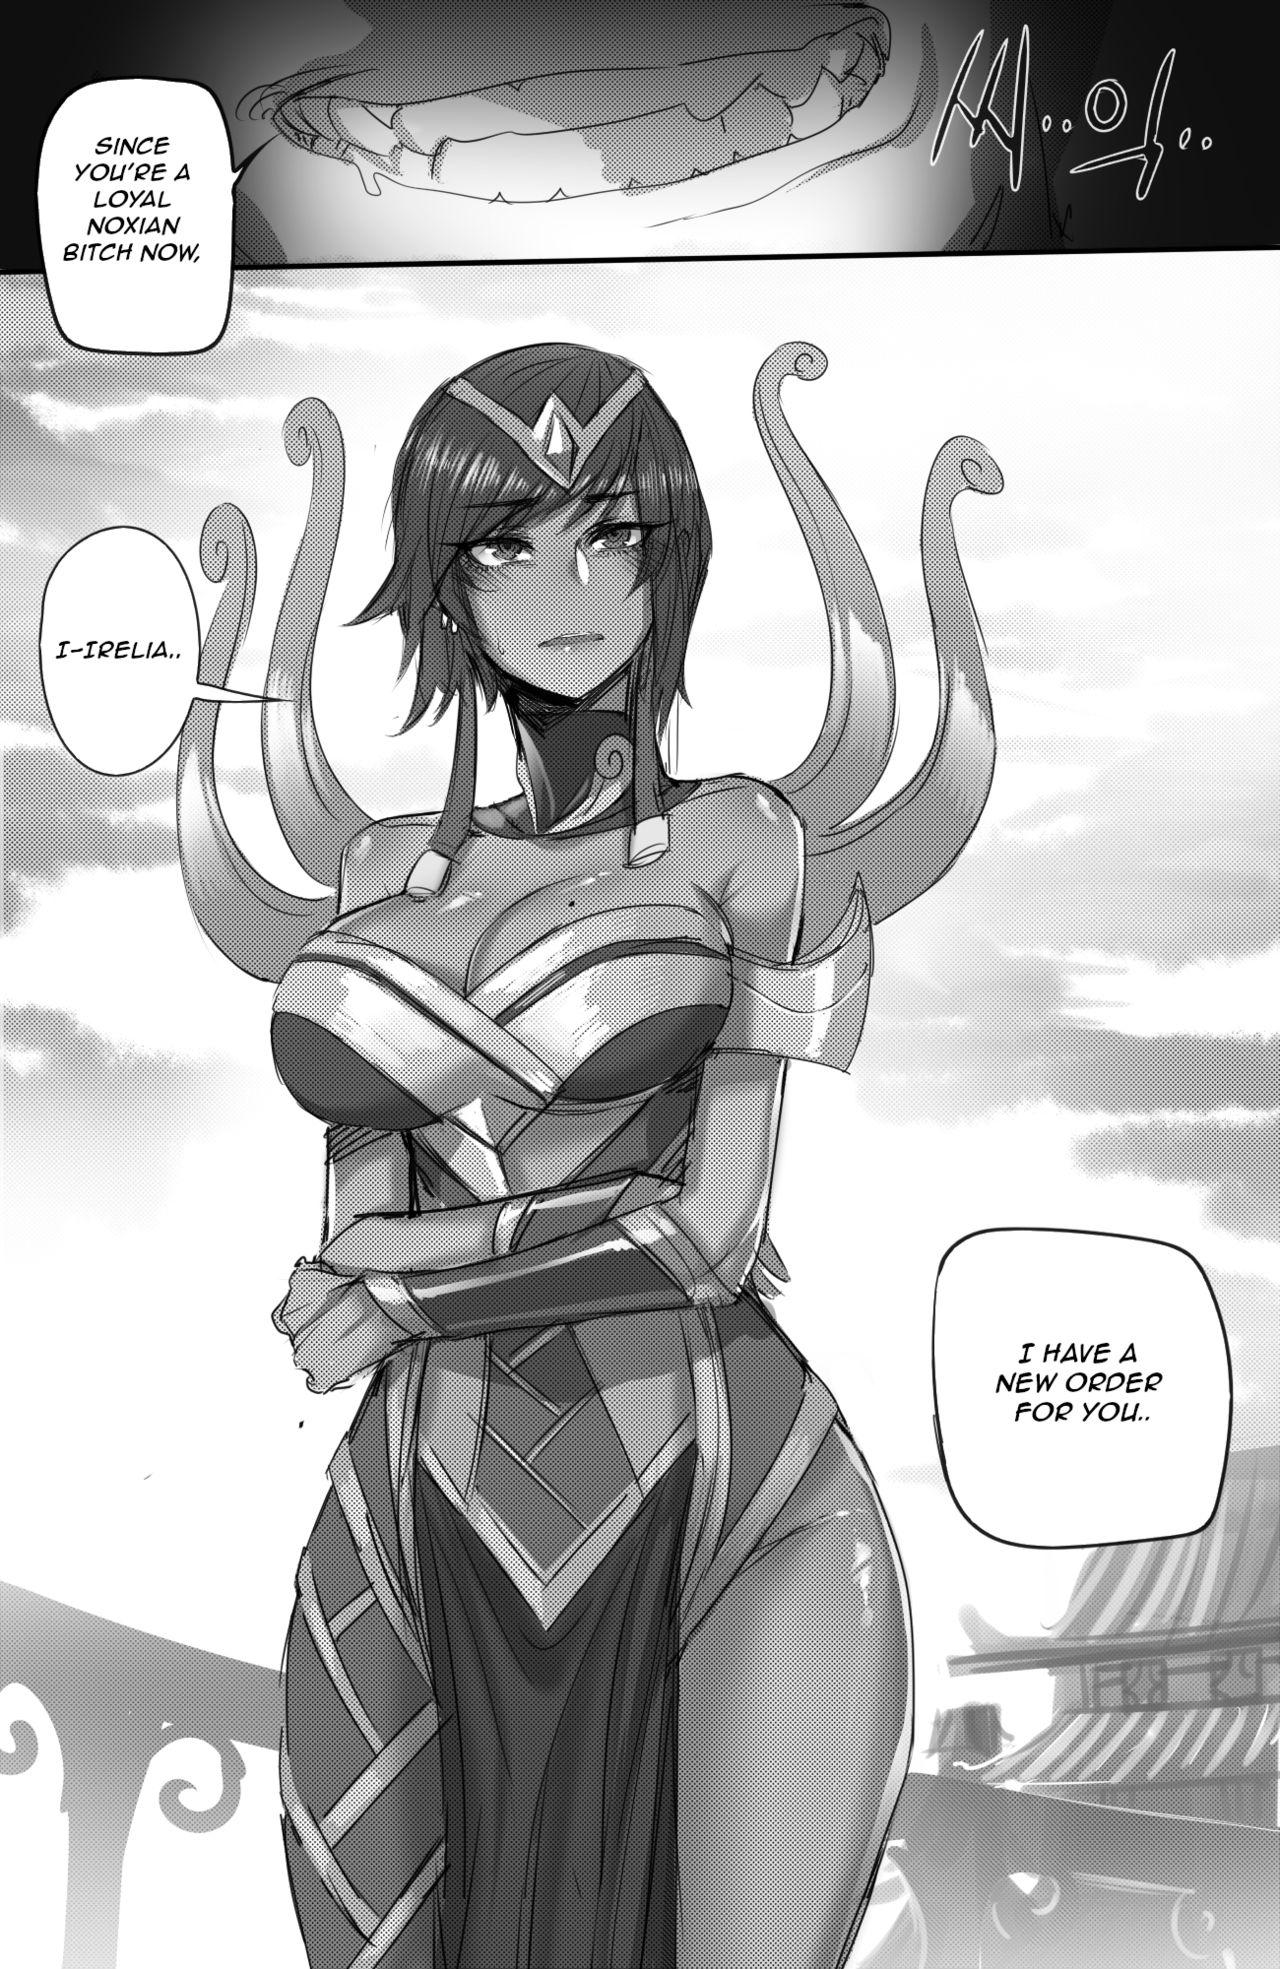 Ddf Porn The Fall of Irelia 2 - League of legends Lingerie - Page 24